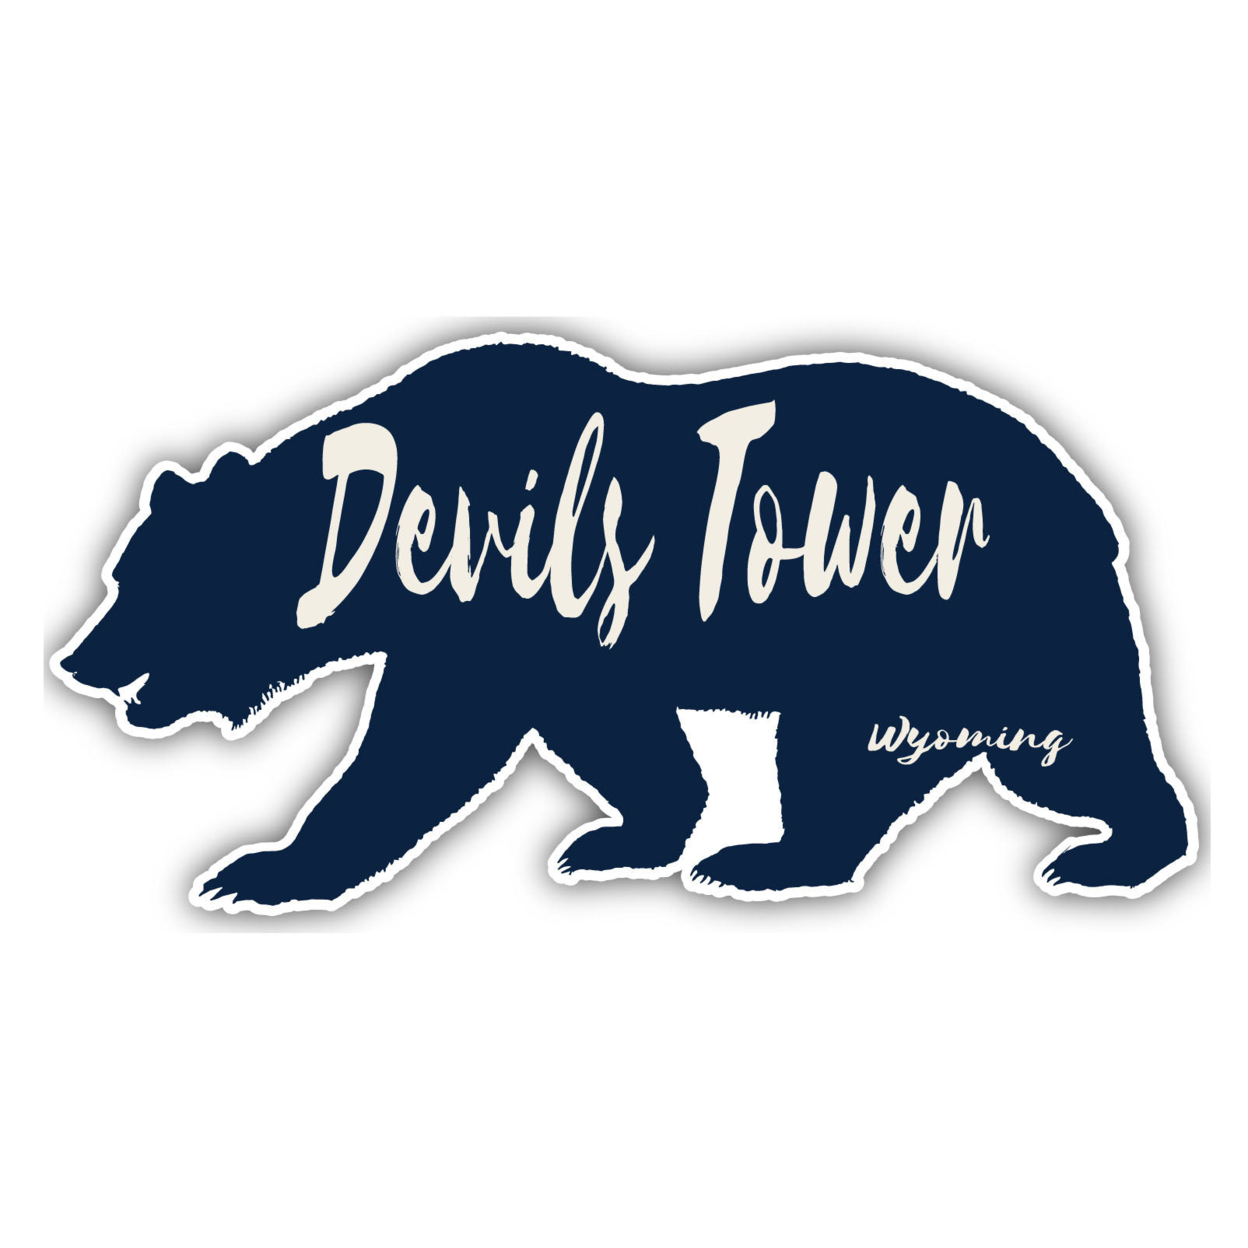 Devils Tower Wyoming Souvenir Decorative Stickers (Choose Theme And Size) - Single Unit, 2-Inch, Bear